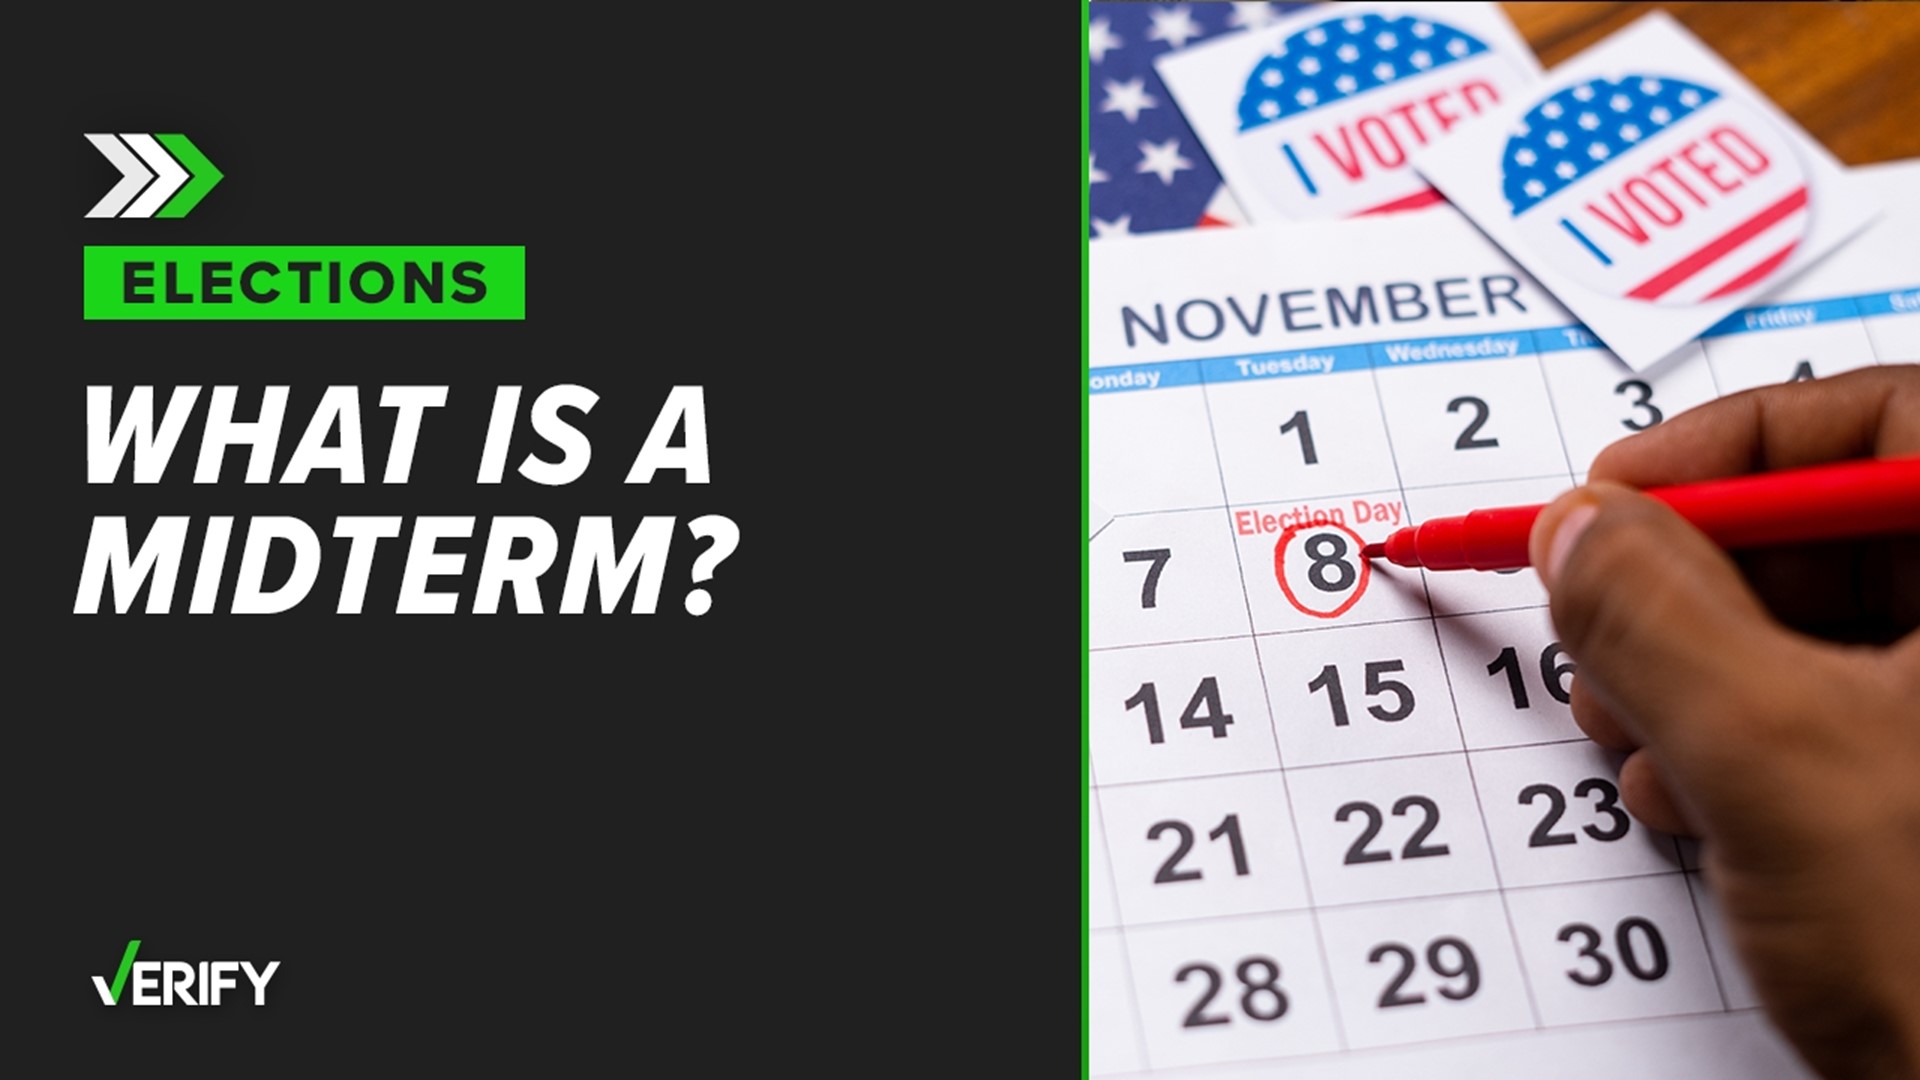 The origins of midterm elections and what they mean.